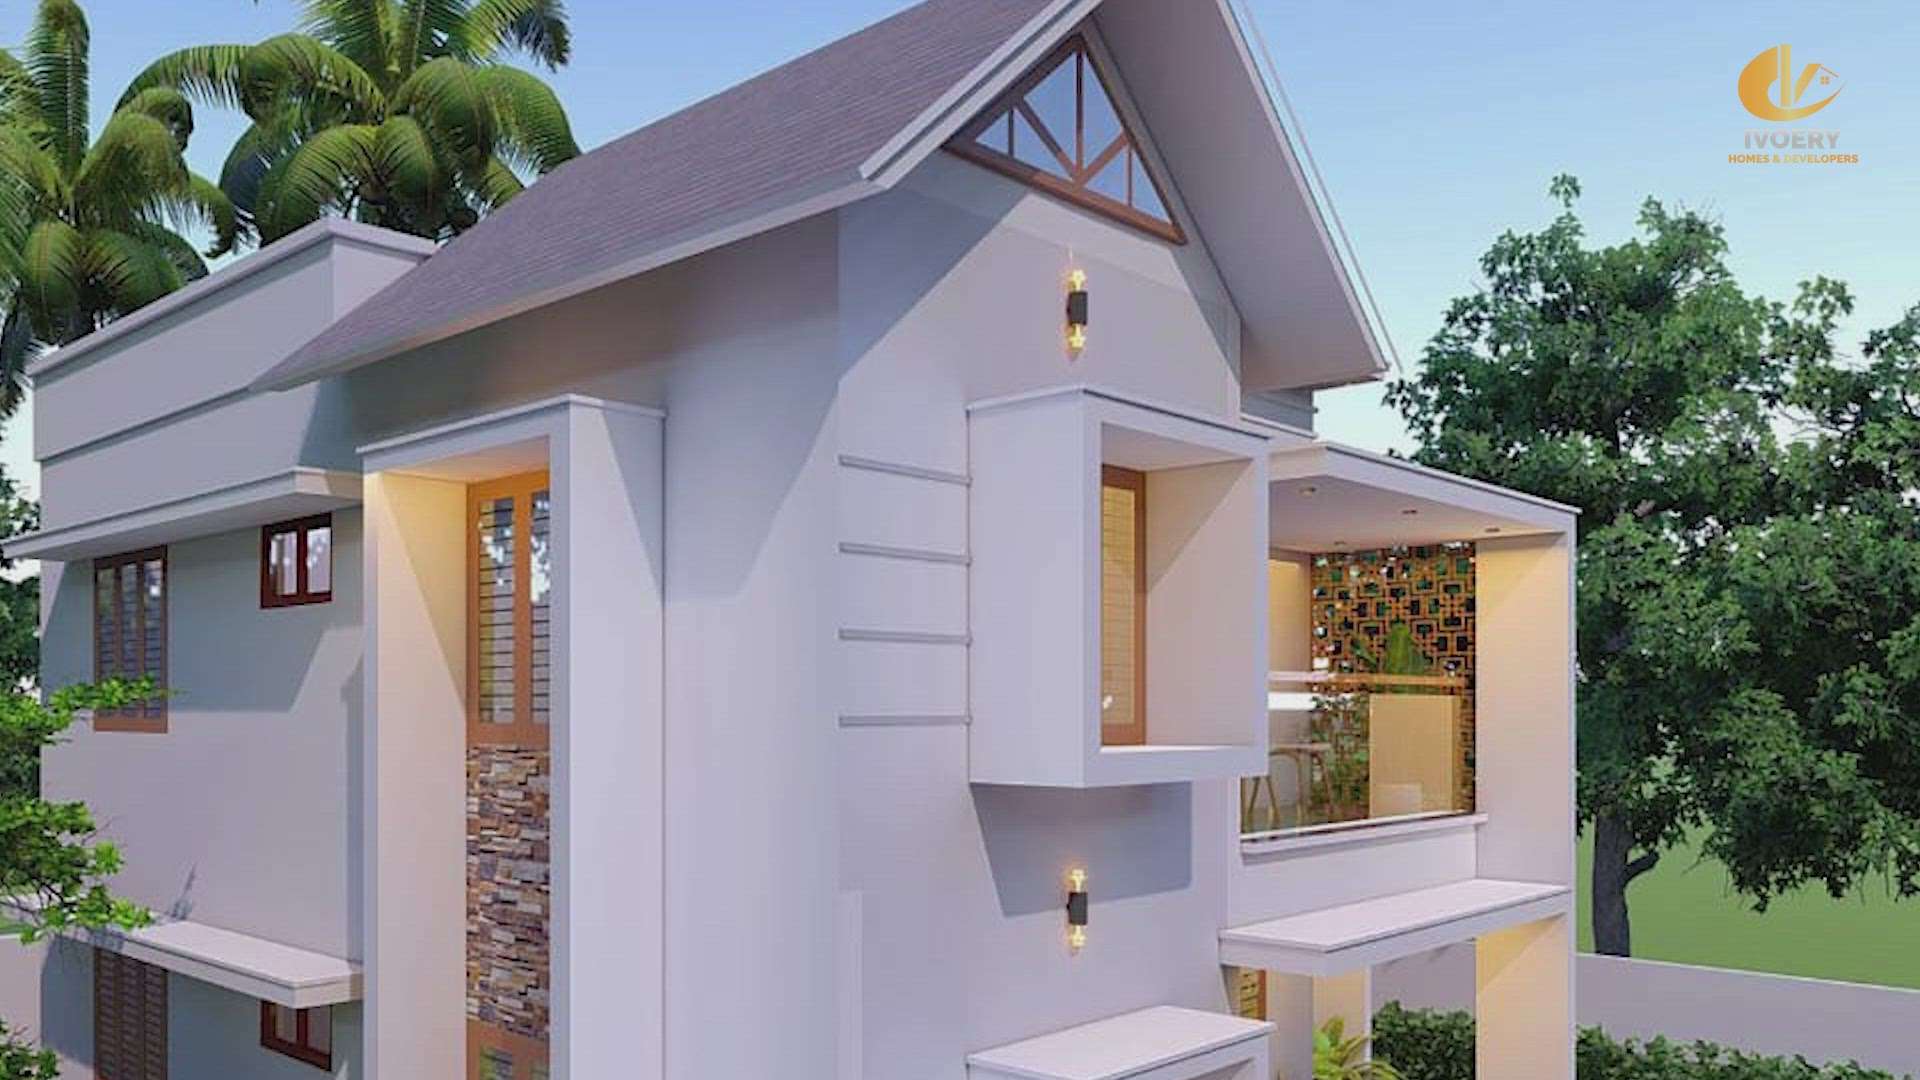 Contact us immediately at 8055234222 for 3d designing and visualization, interior designing and construction requirements. 

 #ivoeryhomes  #ivoeryhomesanddevelopers  #3dvisualisation  #walkthrough  #HouseConstruction  #constructioncompany  #ConstructionCompaniesInKerala